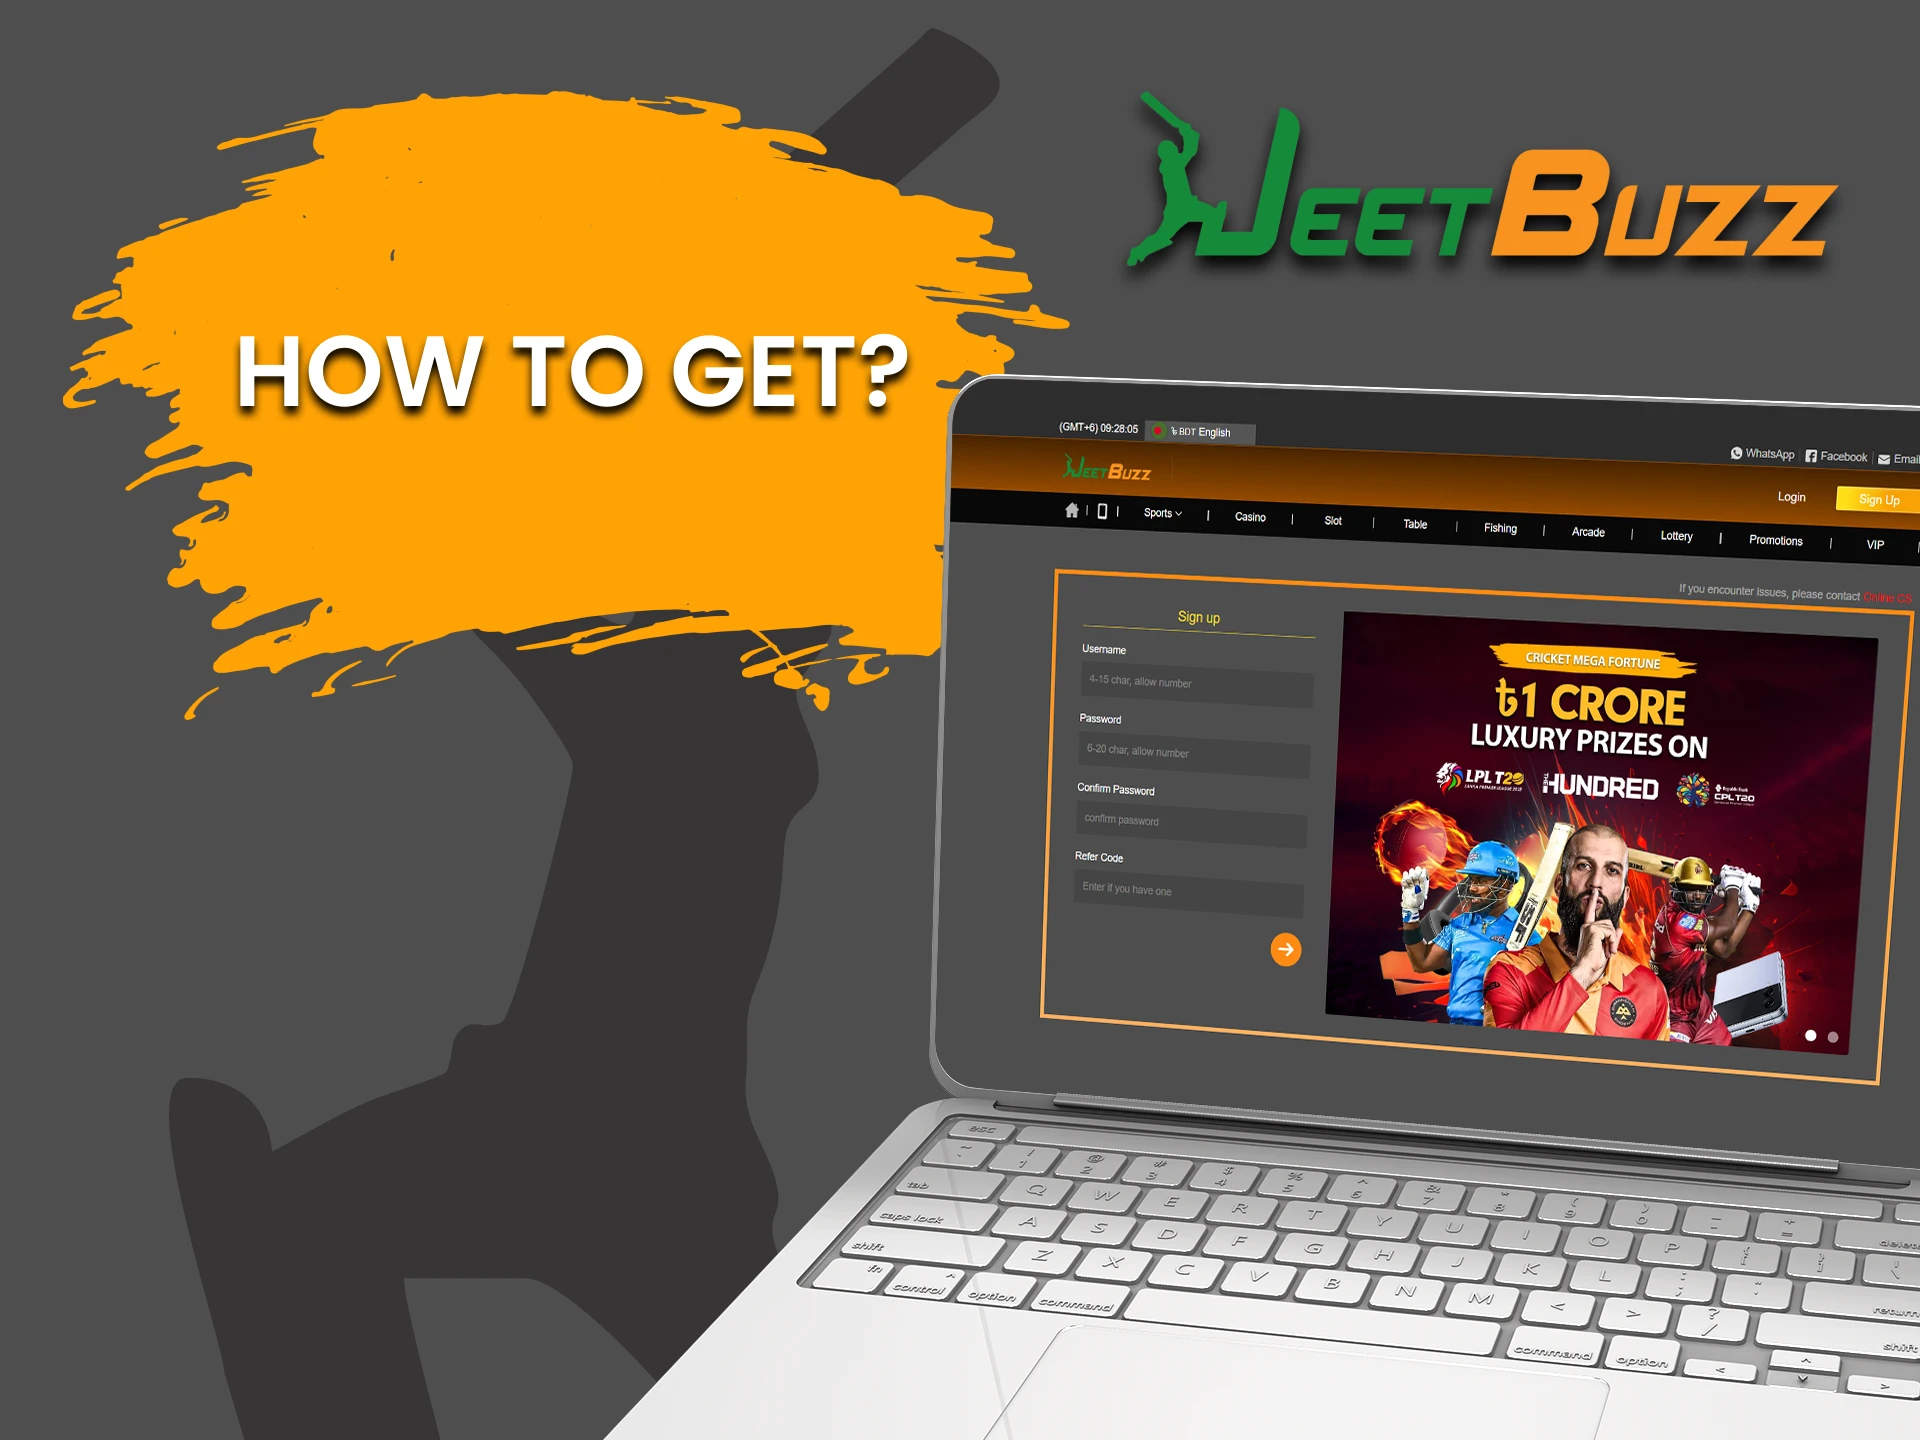 We will tell you how to get a promo code from JeetBuzz.